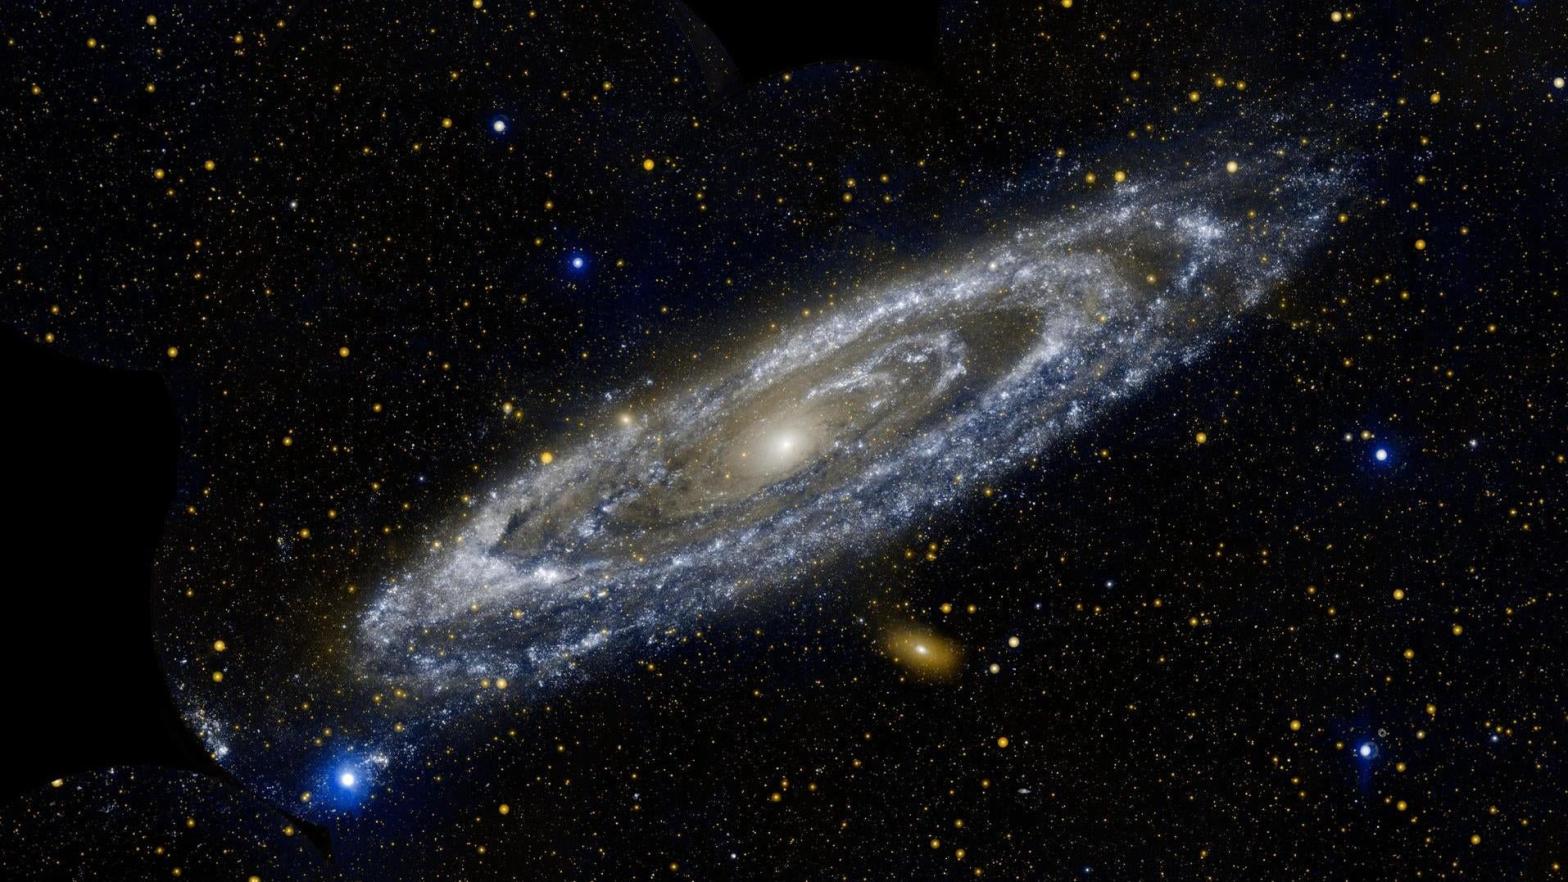 The Andromeda Galaxy captured by the NASA Galaxy Evolution Mapper in 2012. (Image: NASA/JPL-Caltech)